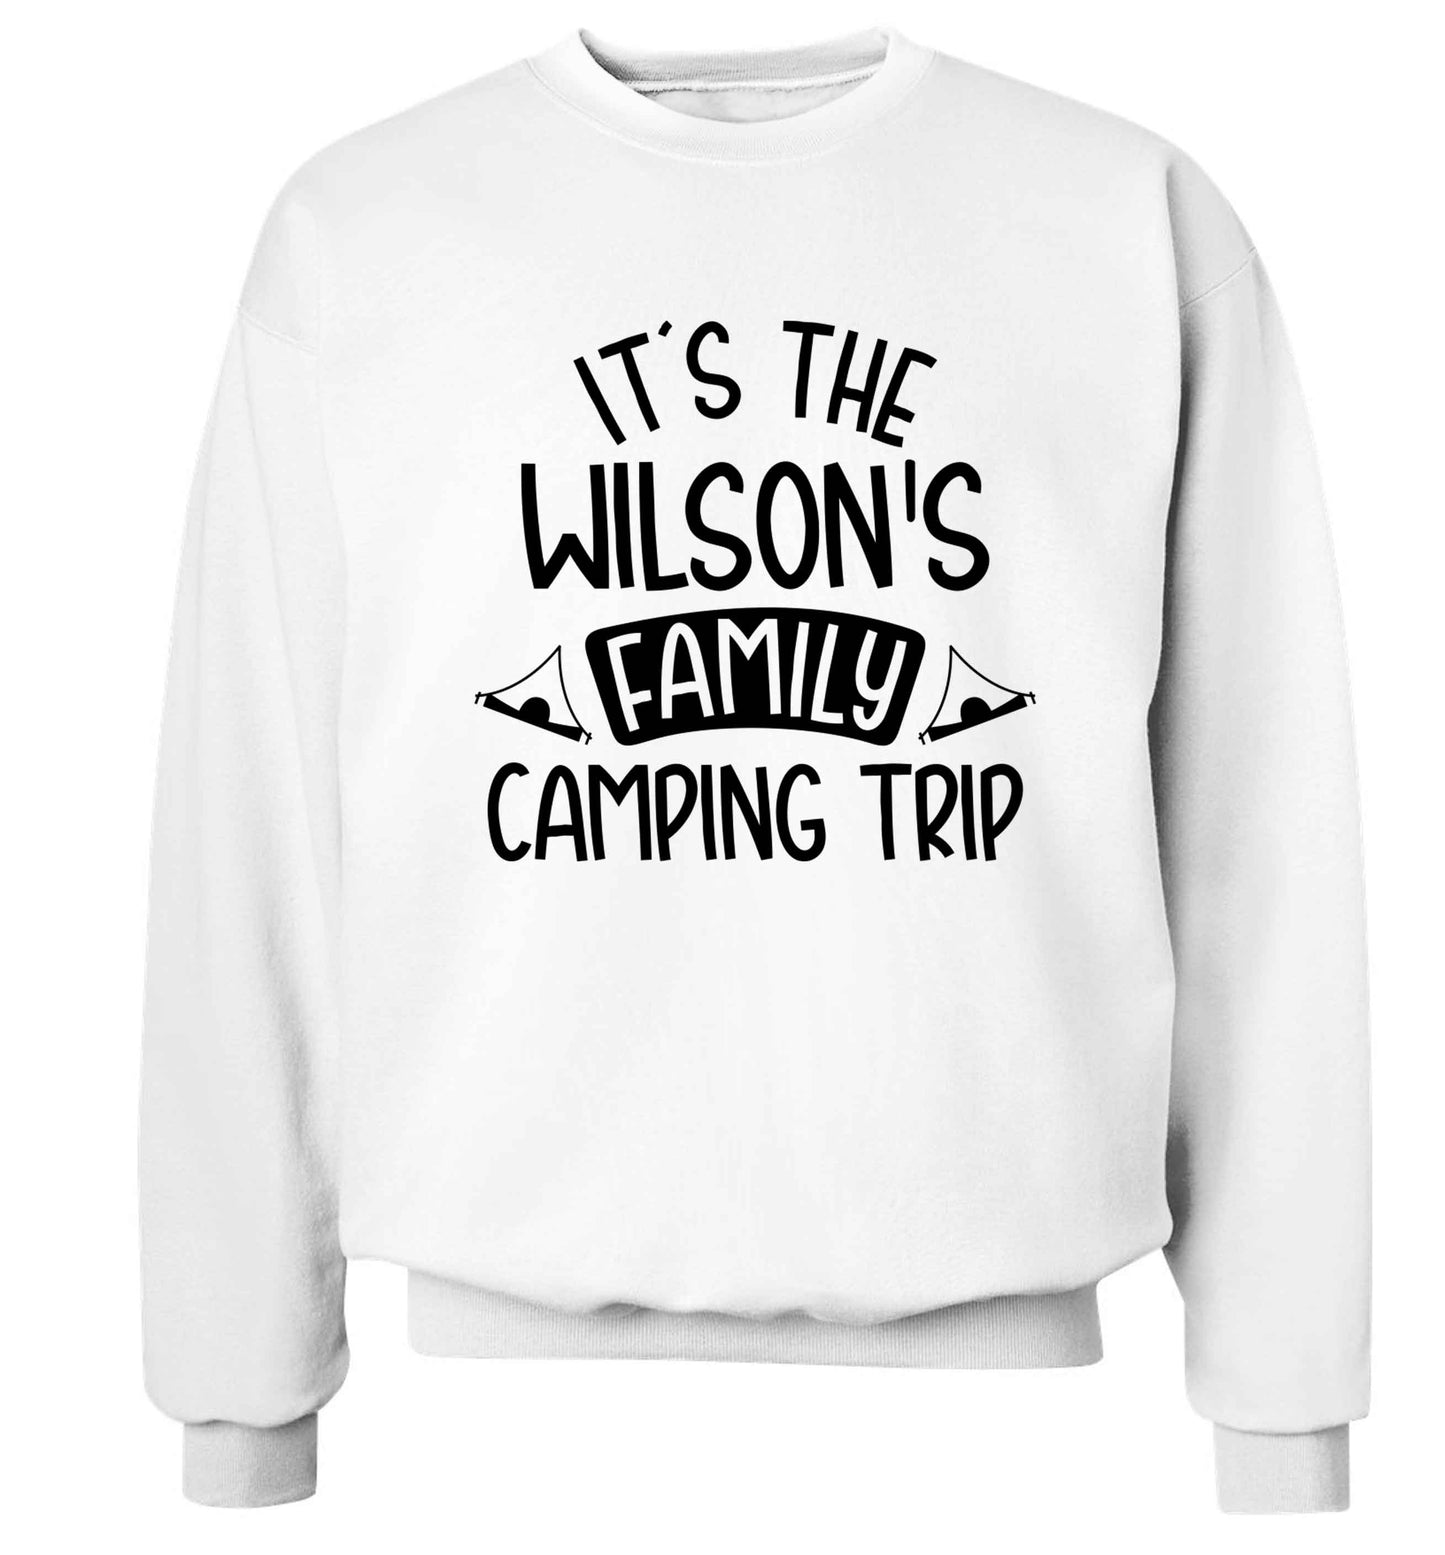 It's the Wilson's family camping trip personalised Adult's unisex white Sweater 2XL